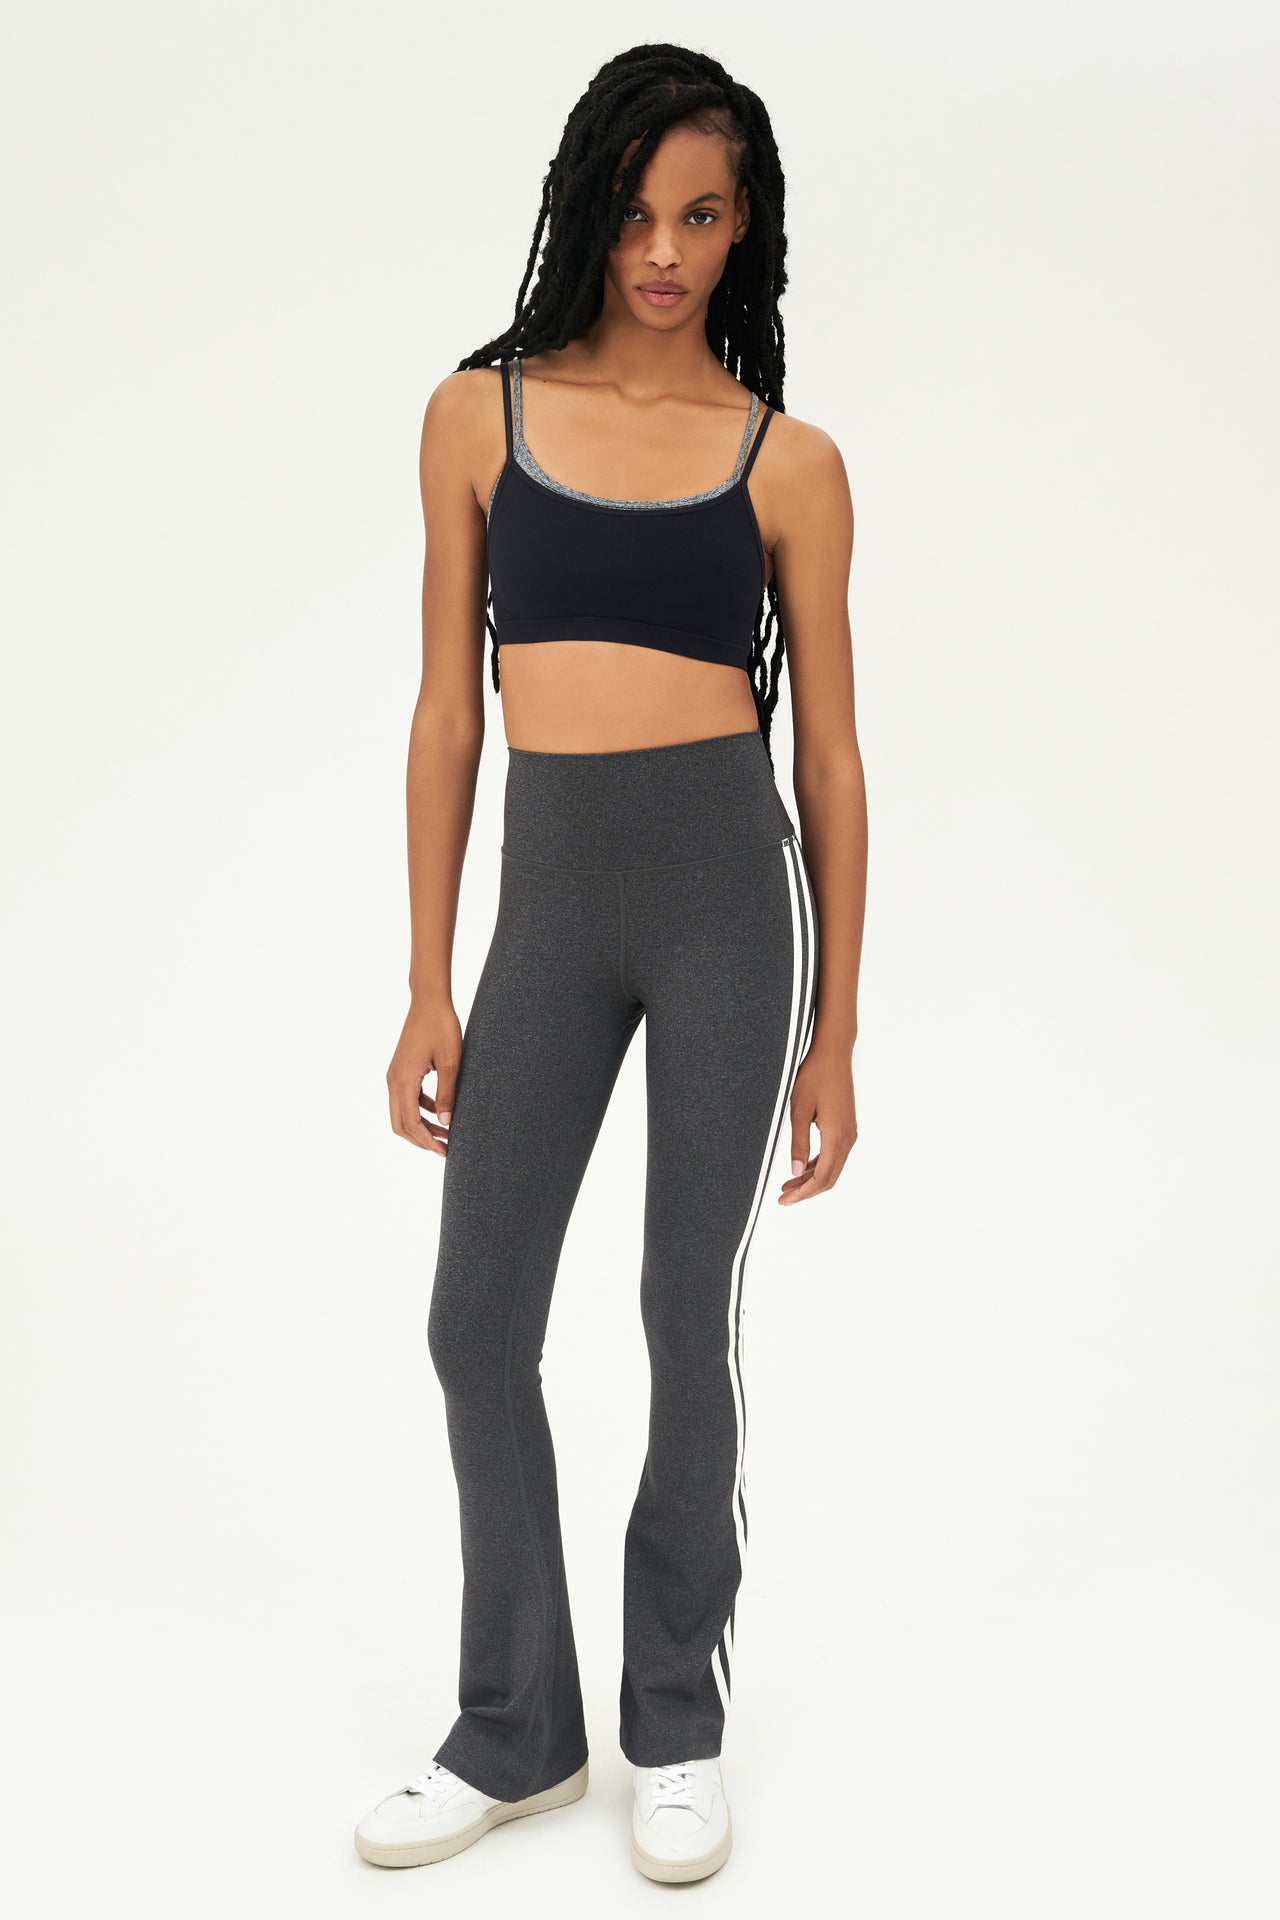 Full front view of woman with black braided hair wearing dark gray high waist below ankle length legging with wide flared bottoms and double white stripes on both legs. Also double dark gray and black racerback bra with spaghetti straps. Paired with white shoes.